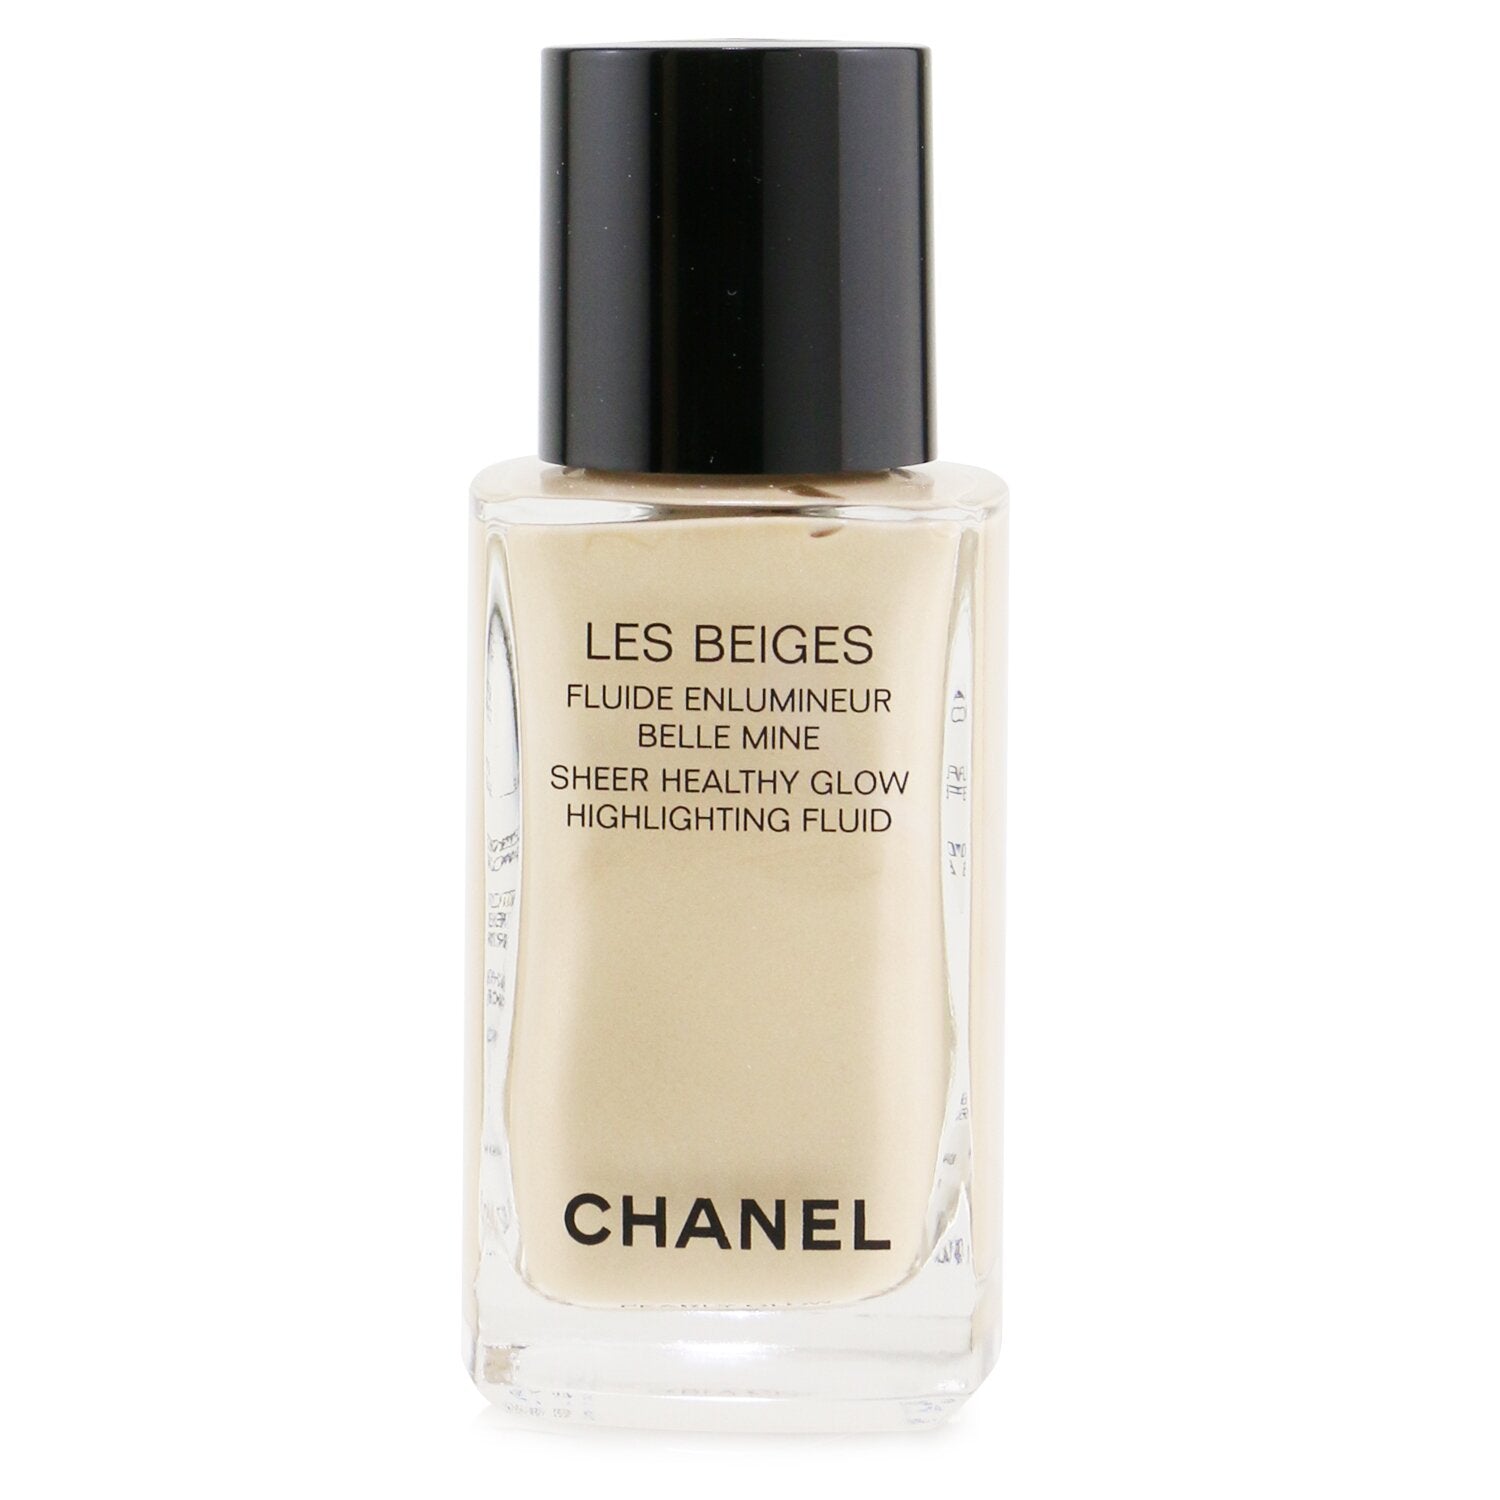 chanel.beauty's Les Beiges Sheer Healthy Glow Highlighting Fluid (Pear